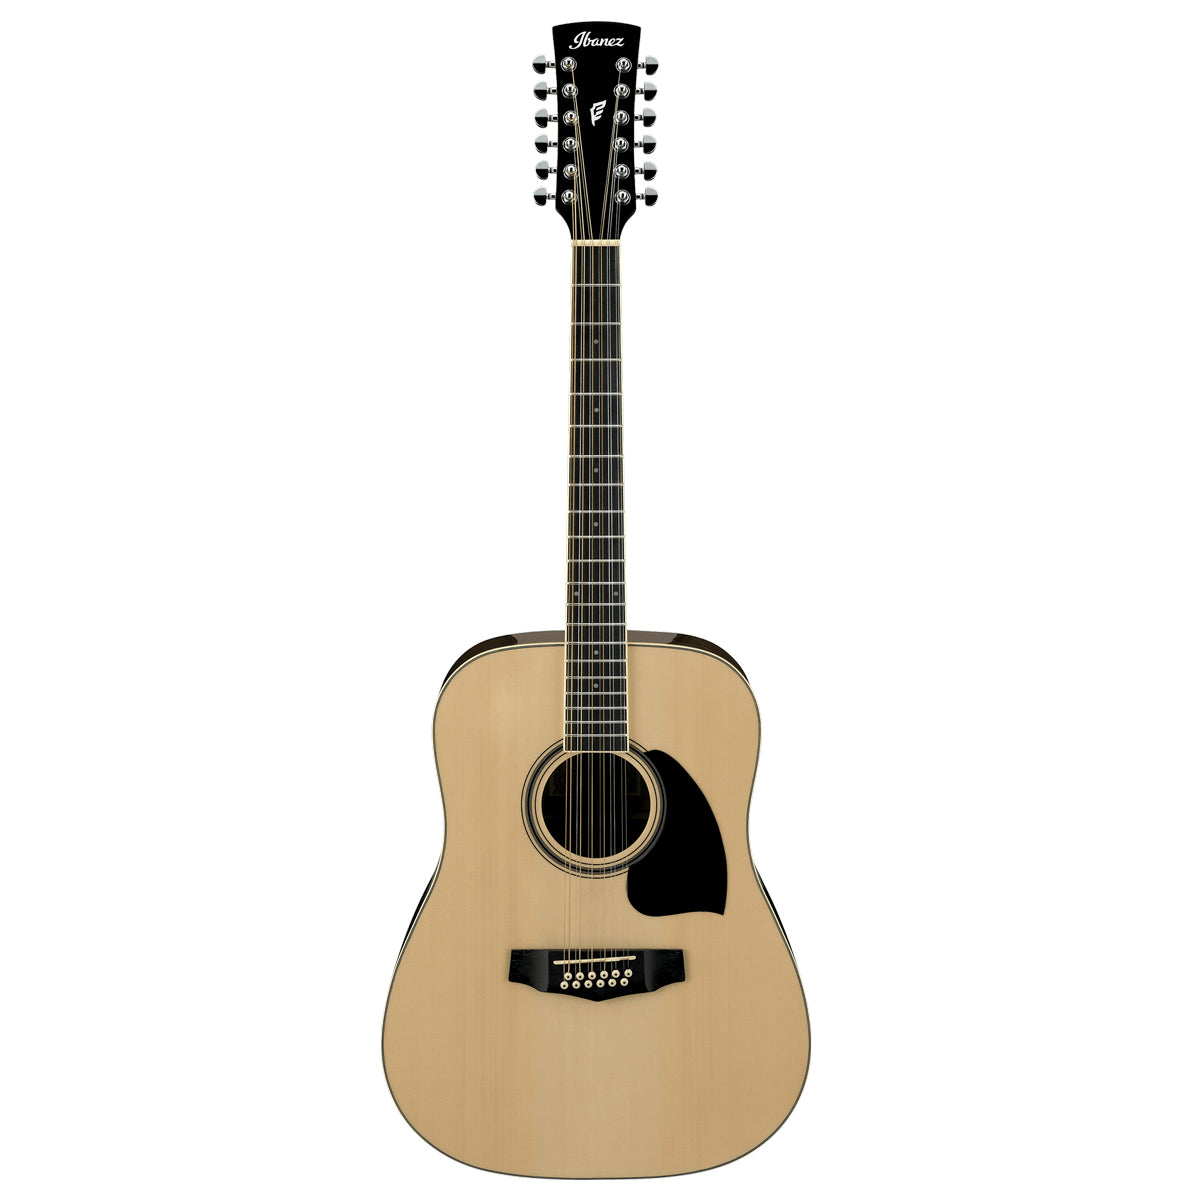 Ibanez PF1512-NT 12 String Acoustic Guitar